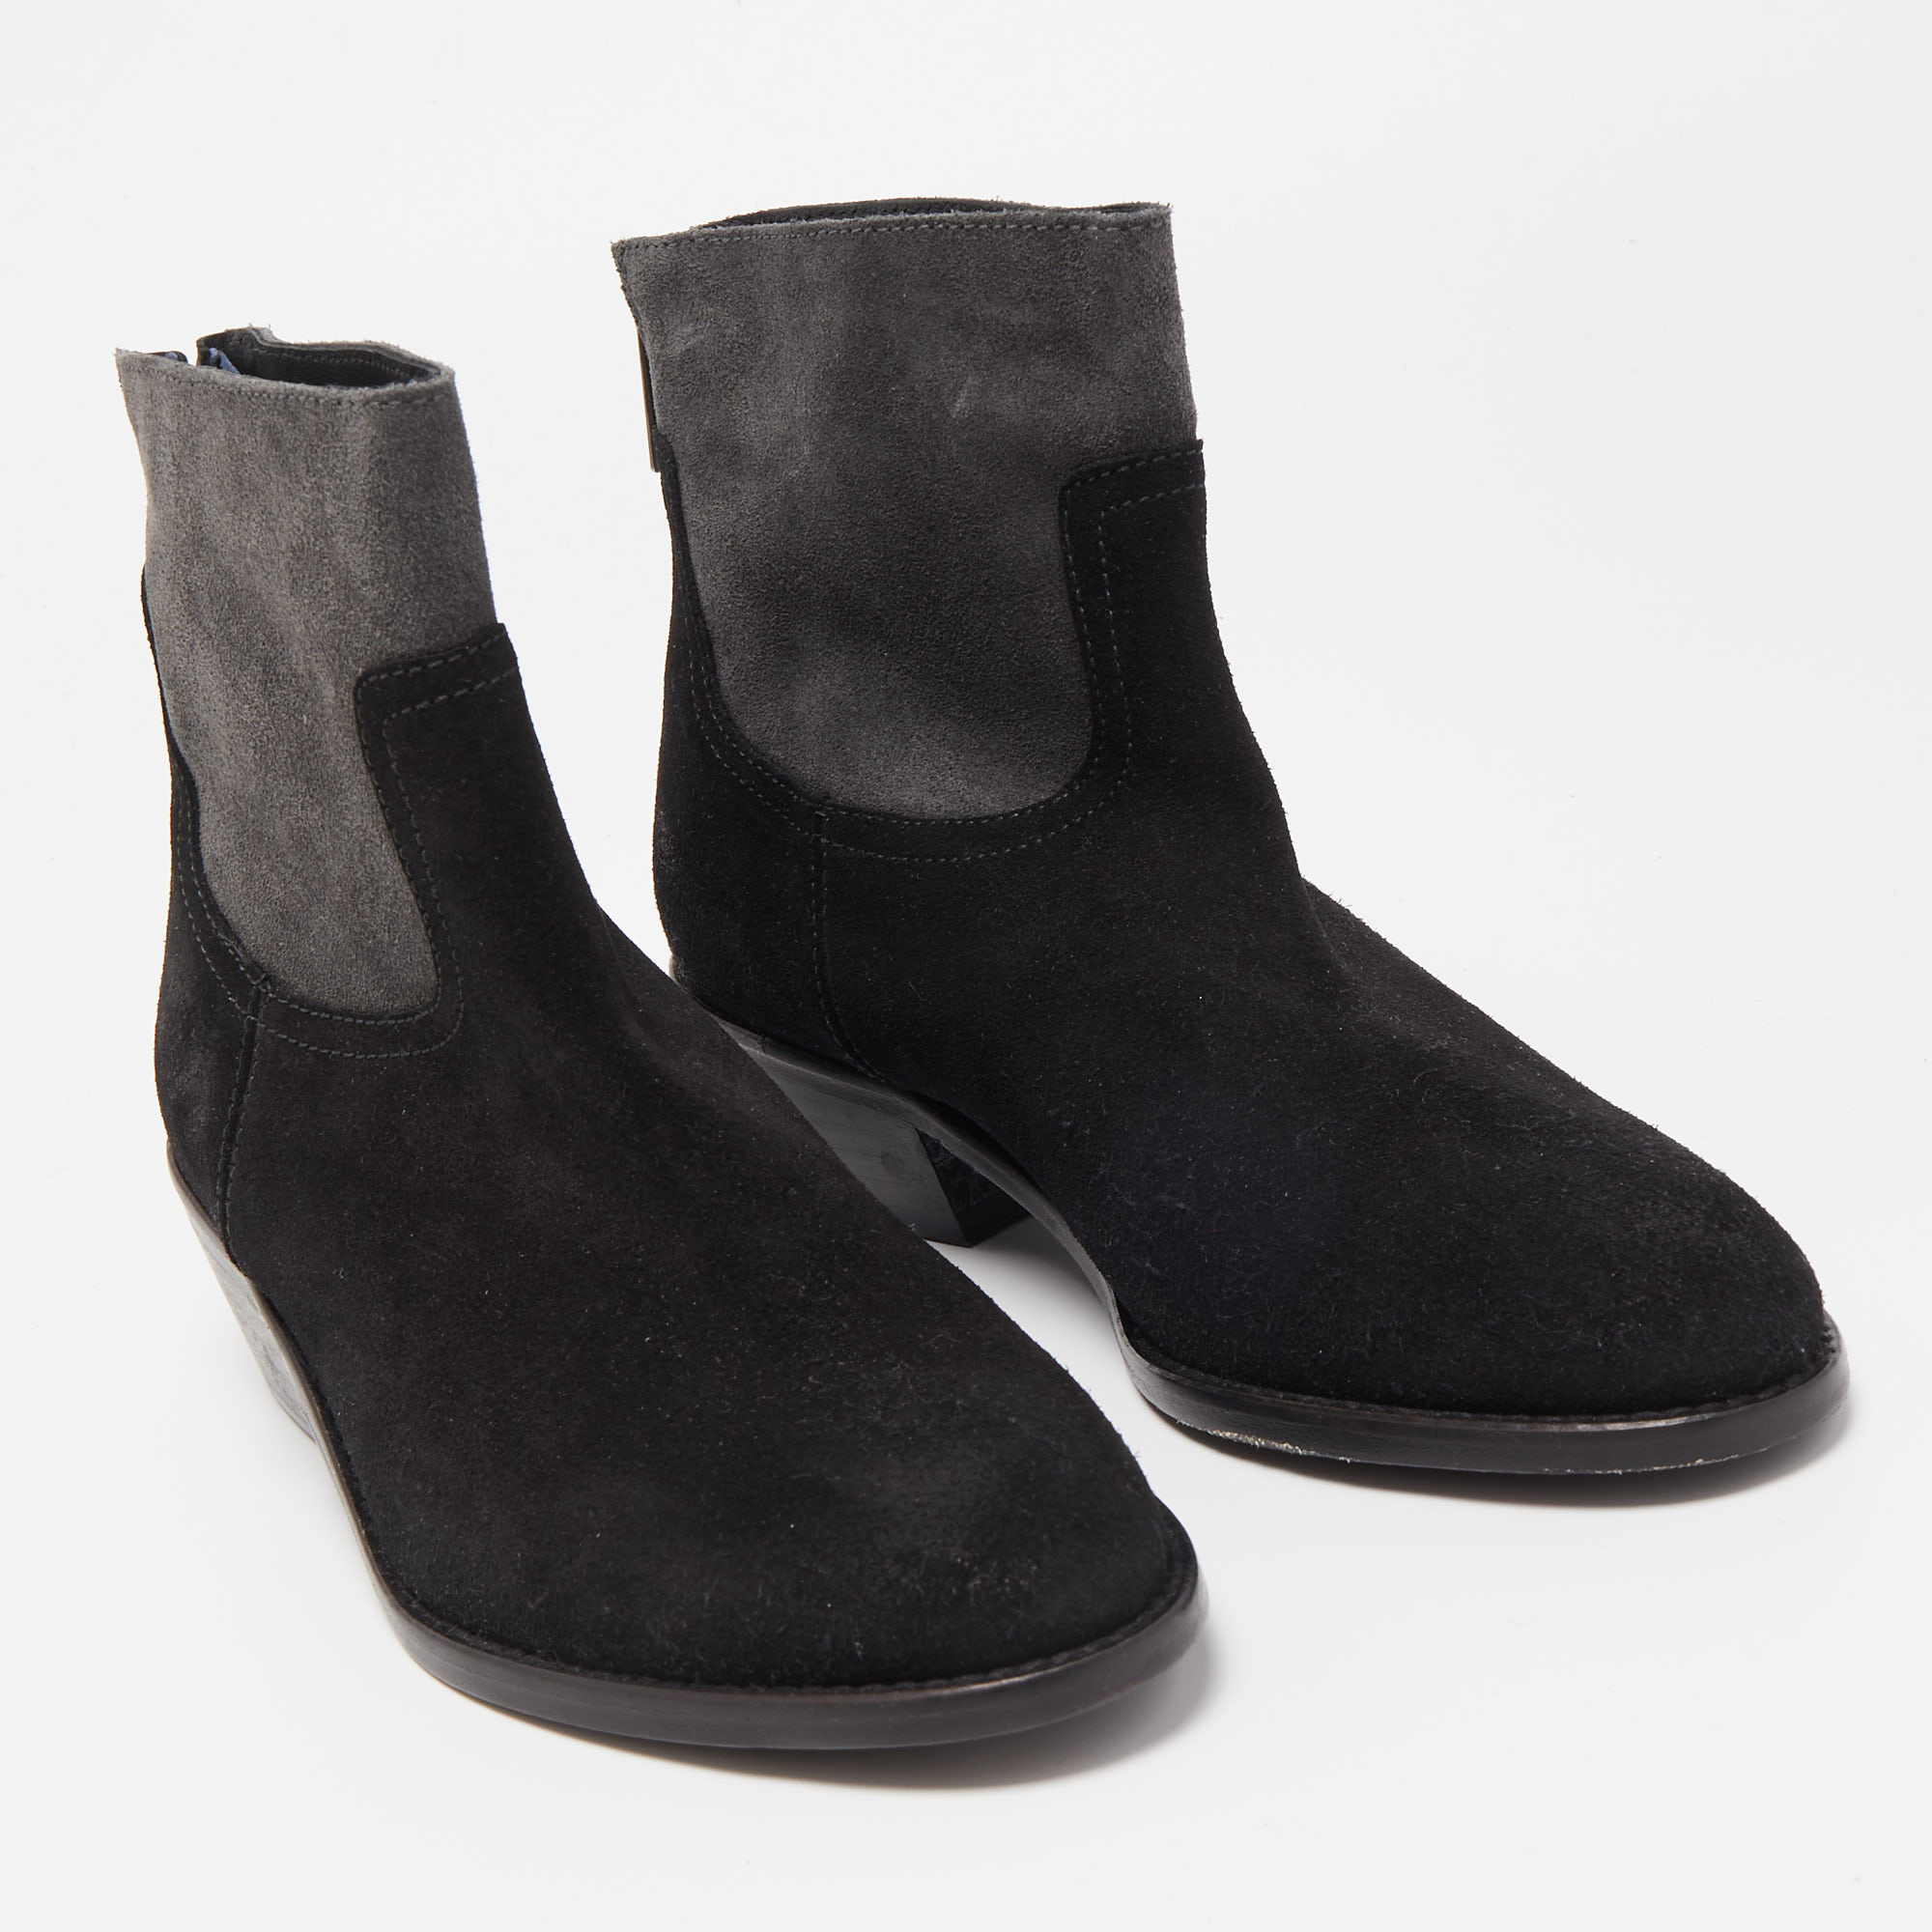 Zadig & Voltaire Black Suede Ankle Boots Size 36